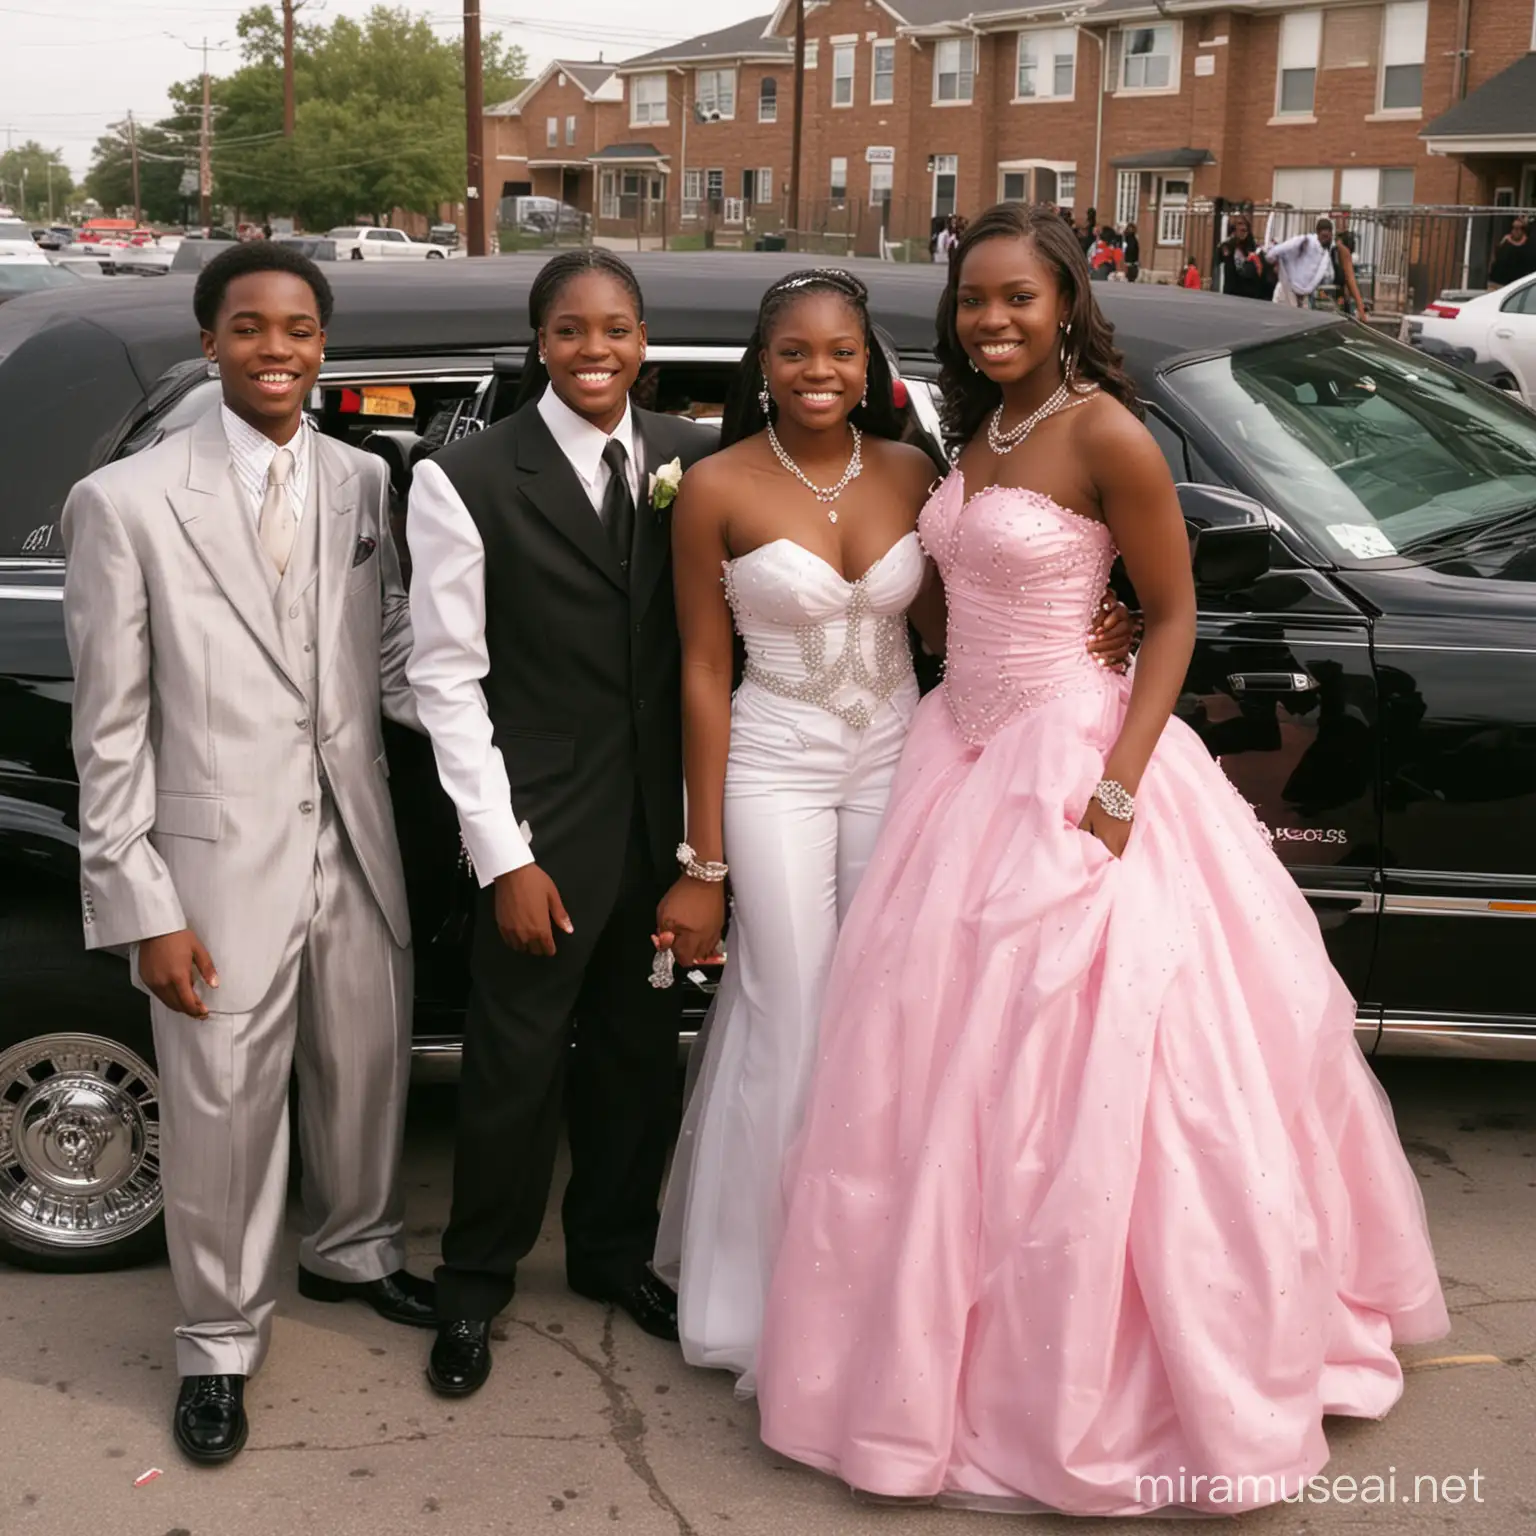 Flashy African American High School Prom in Late 2000s Fabulous Limo Arrival and Stylish Suits